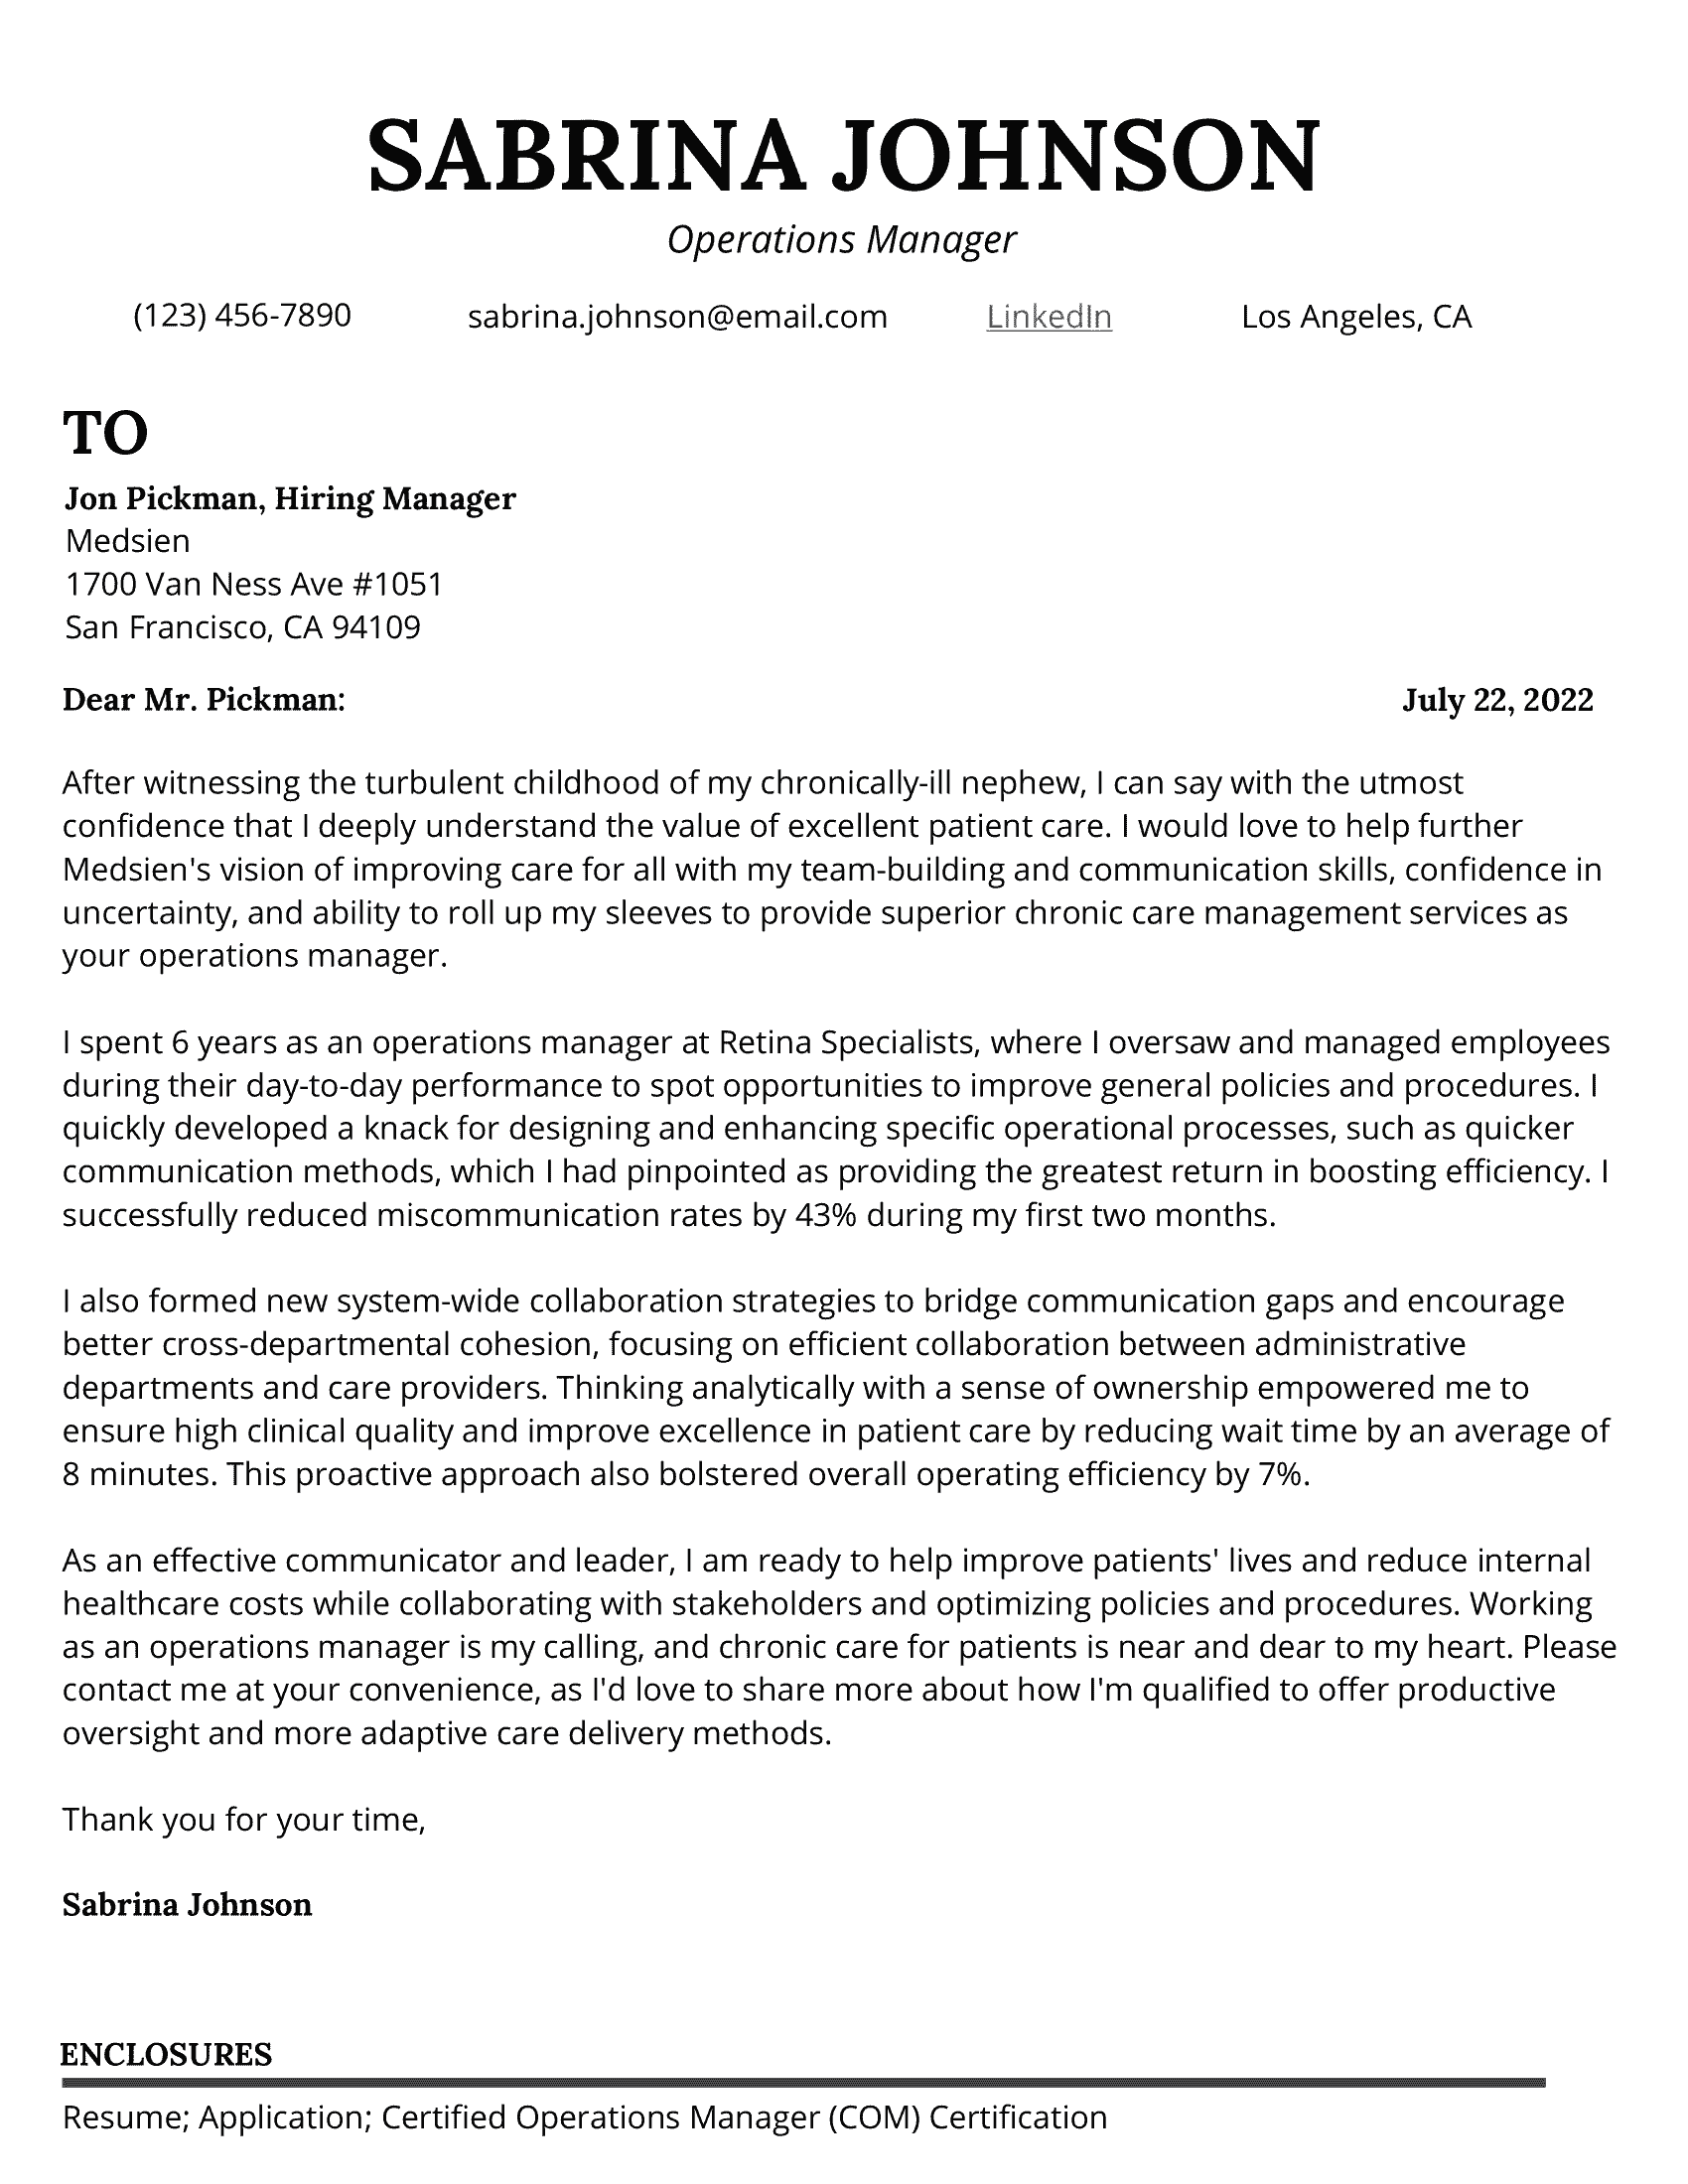 Operations manager cover letter example